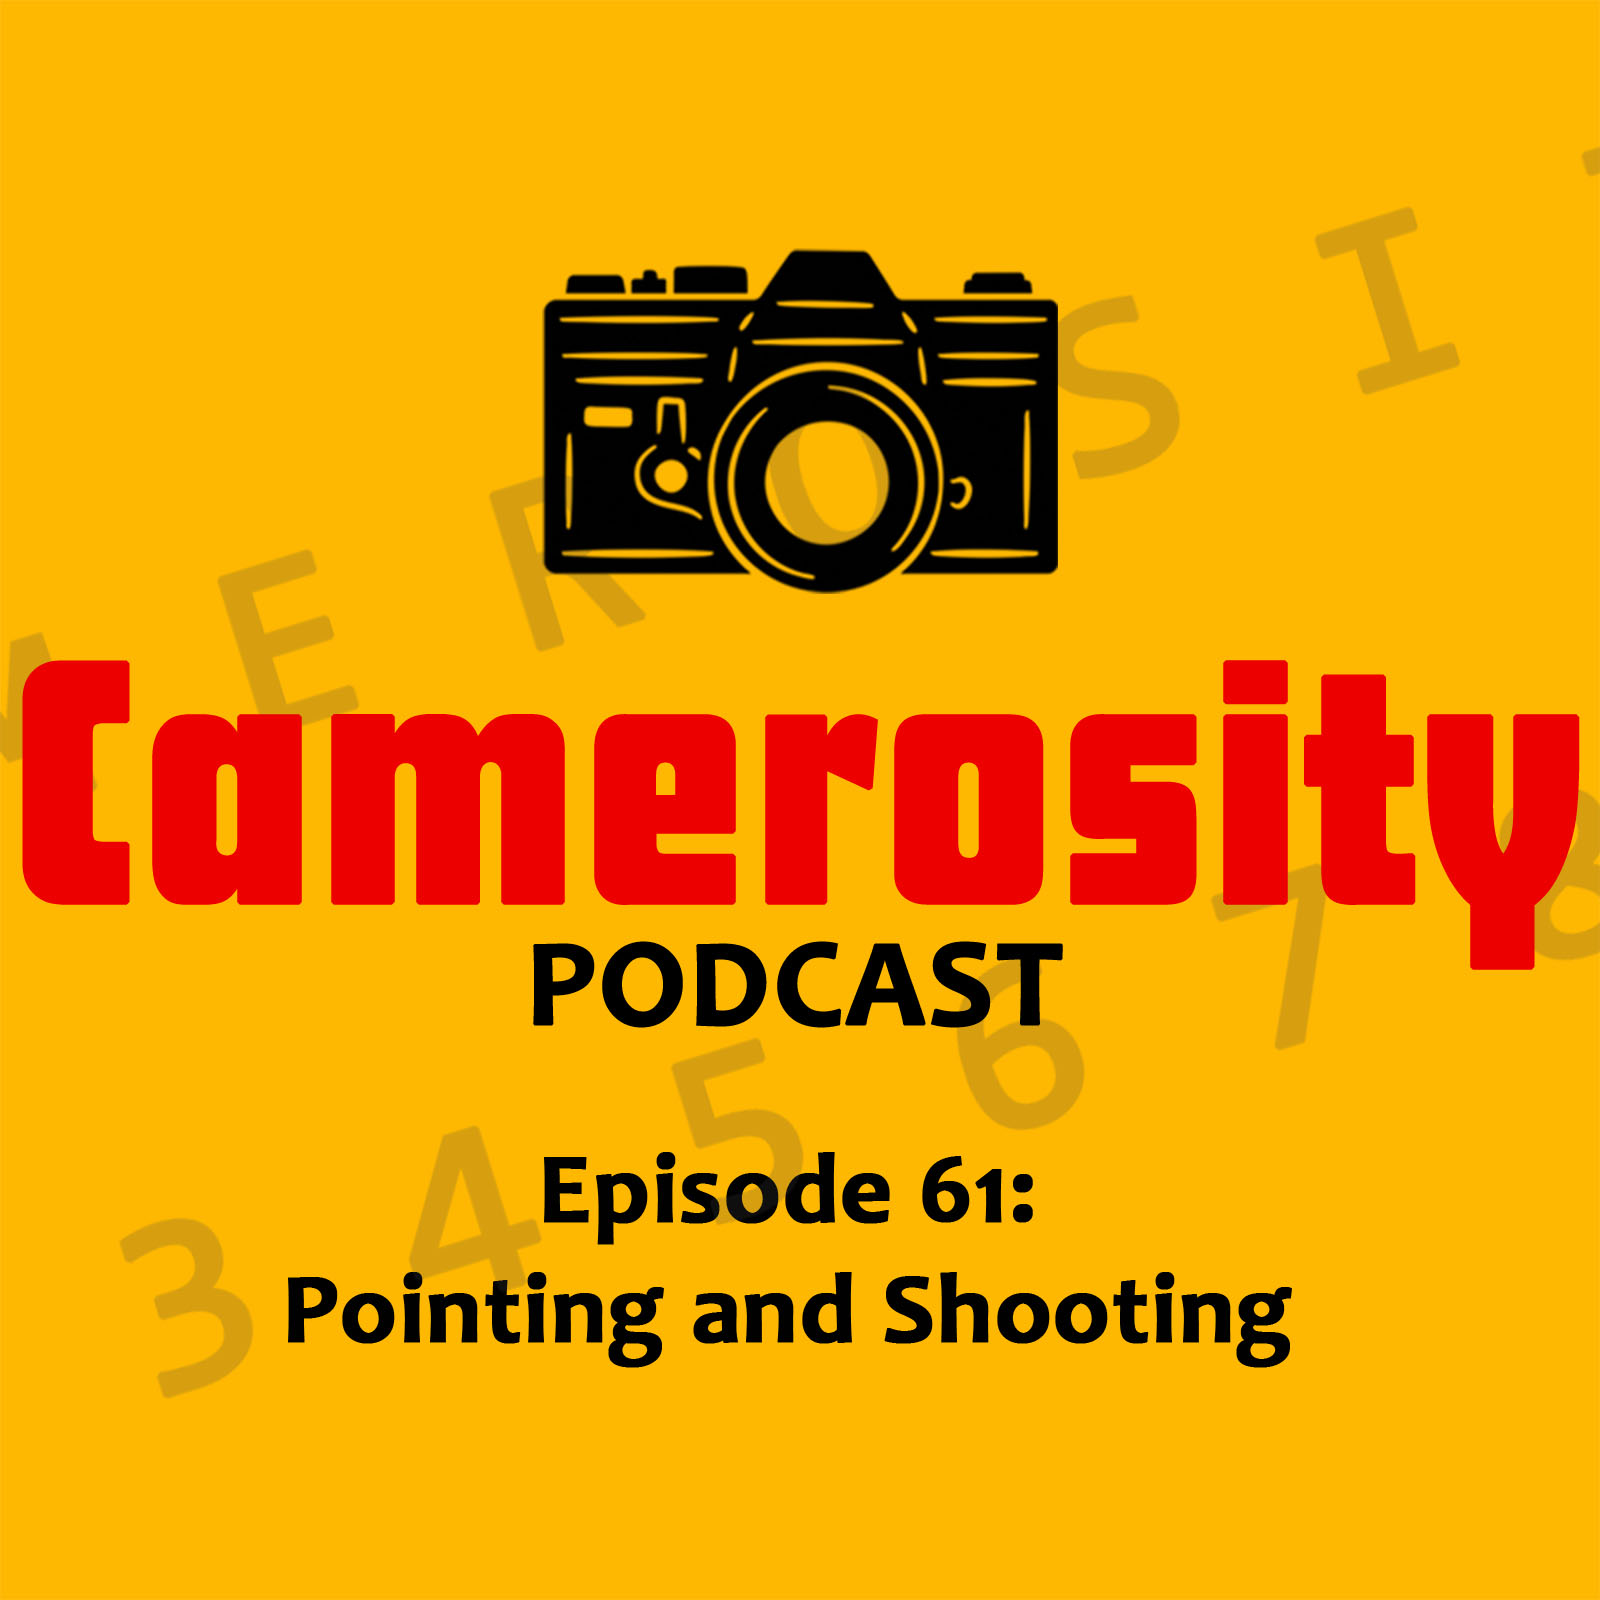 Episode 61: Pointing and Shooting